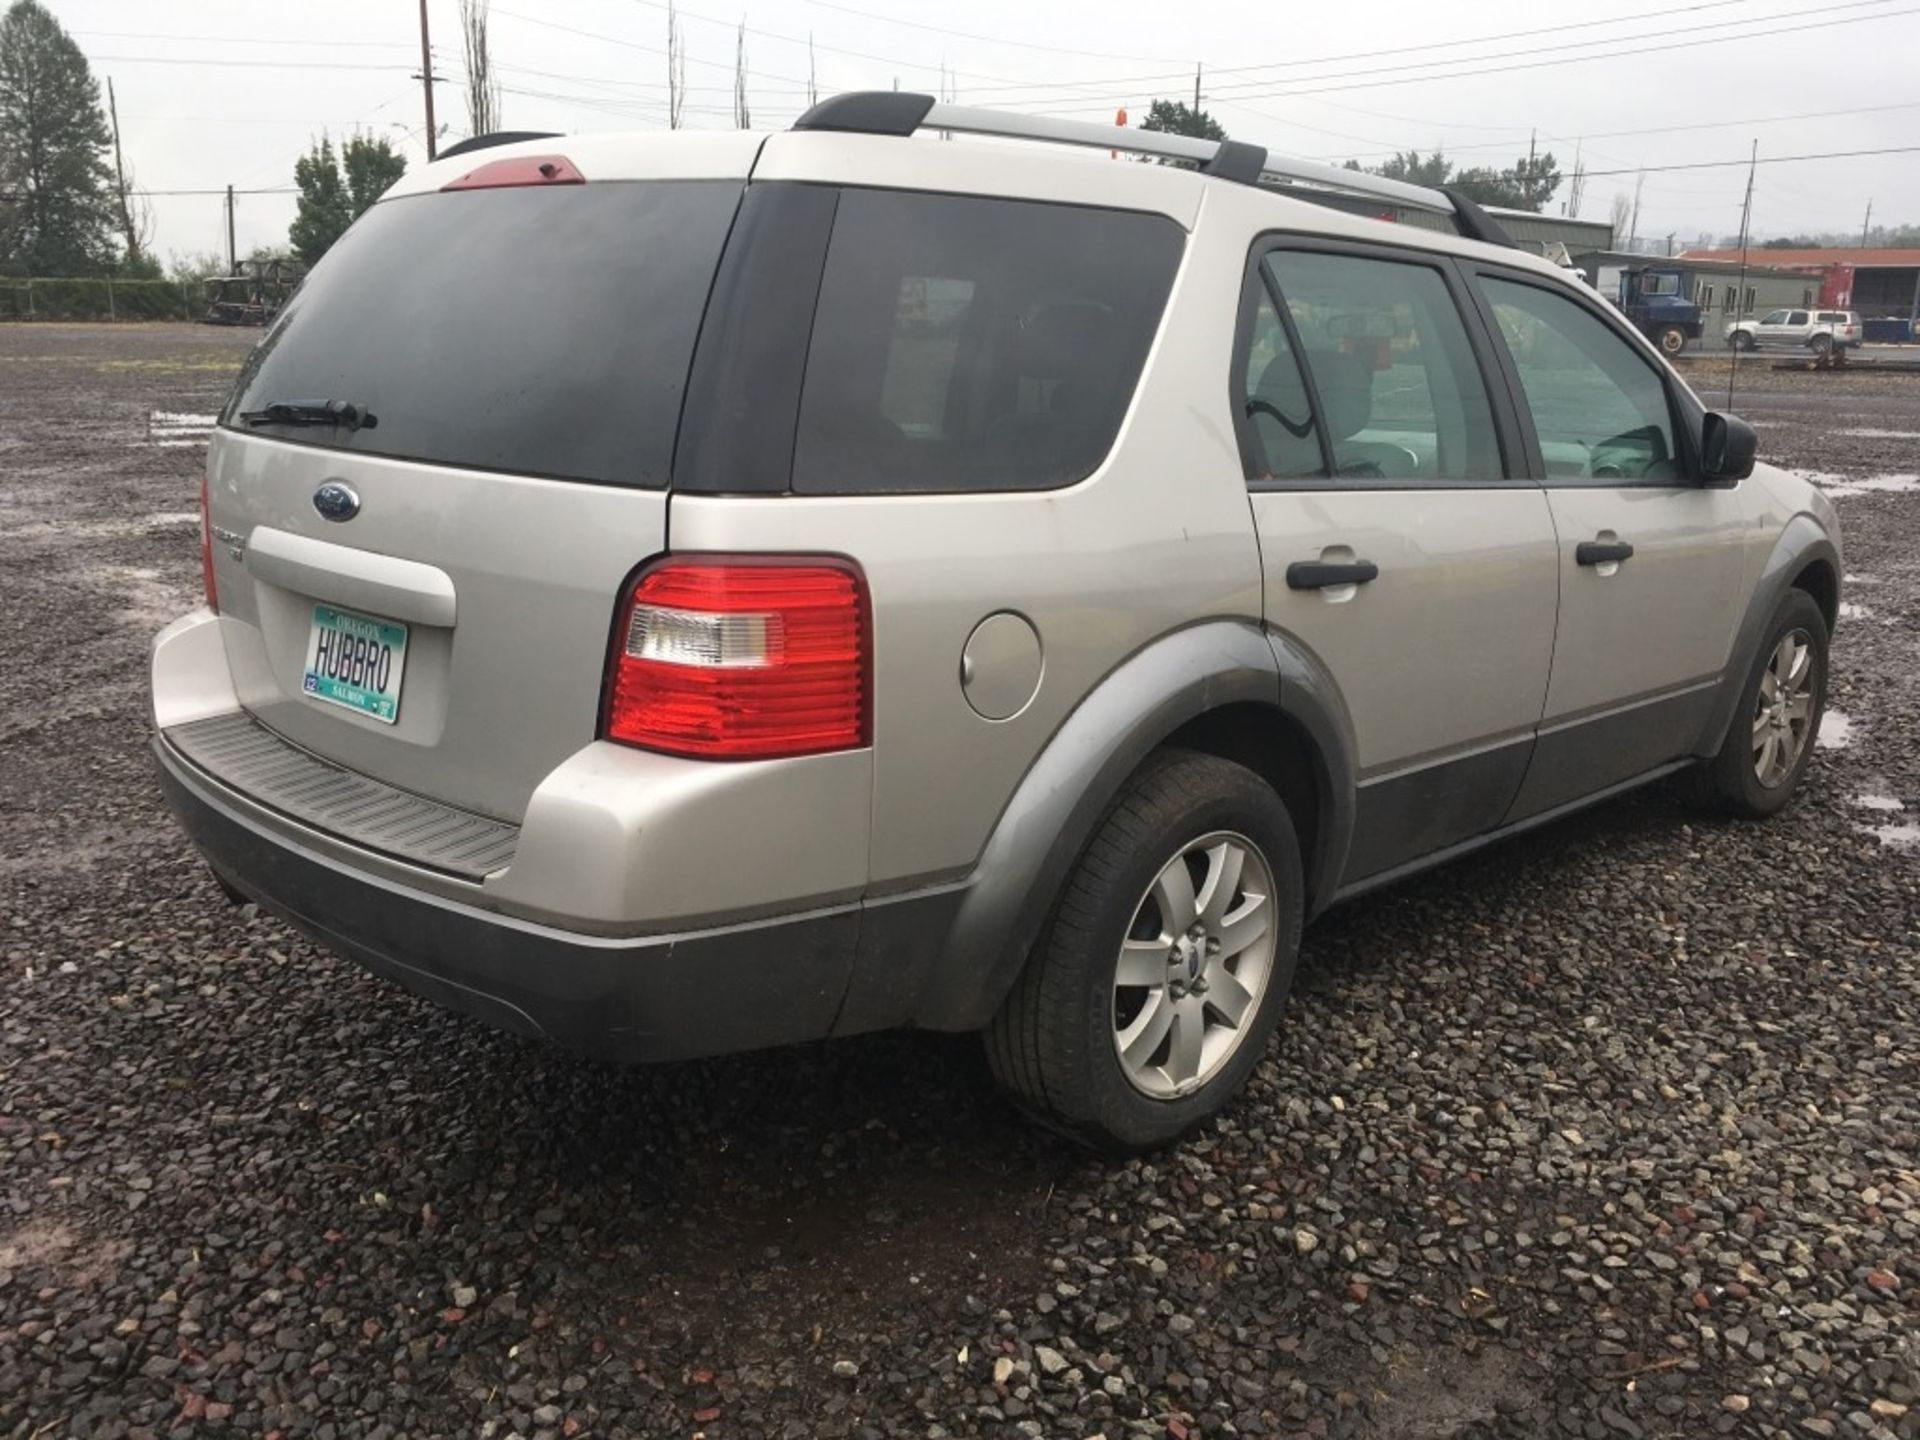 2006 Ford Freestyle Wagon - Image 3 of 19